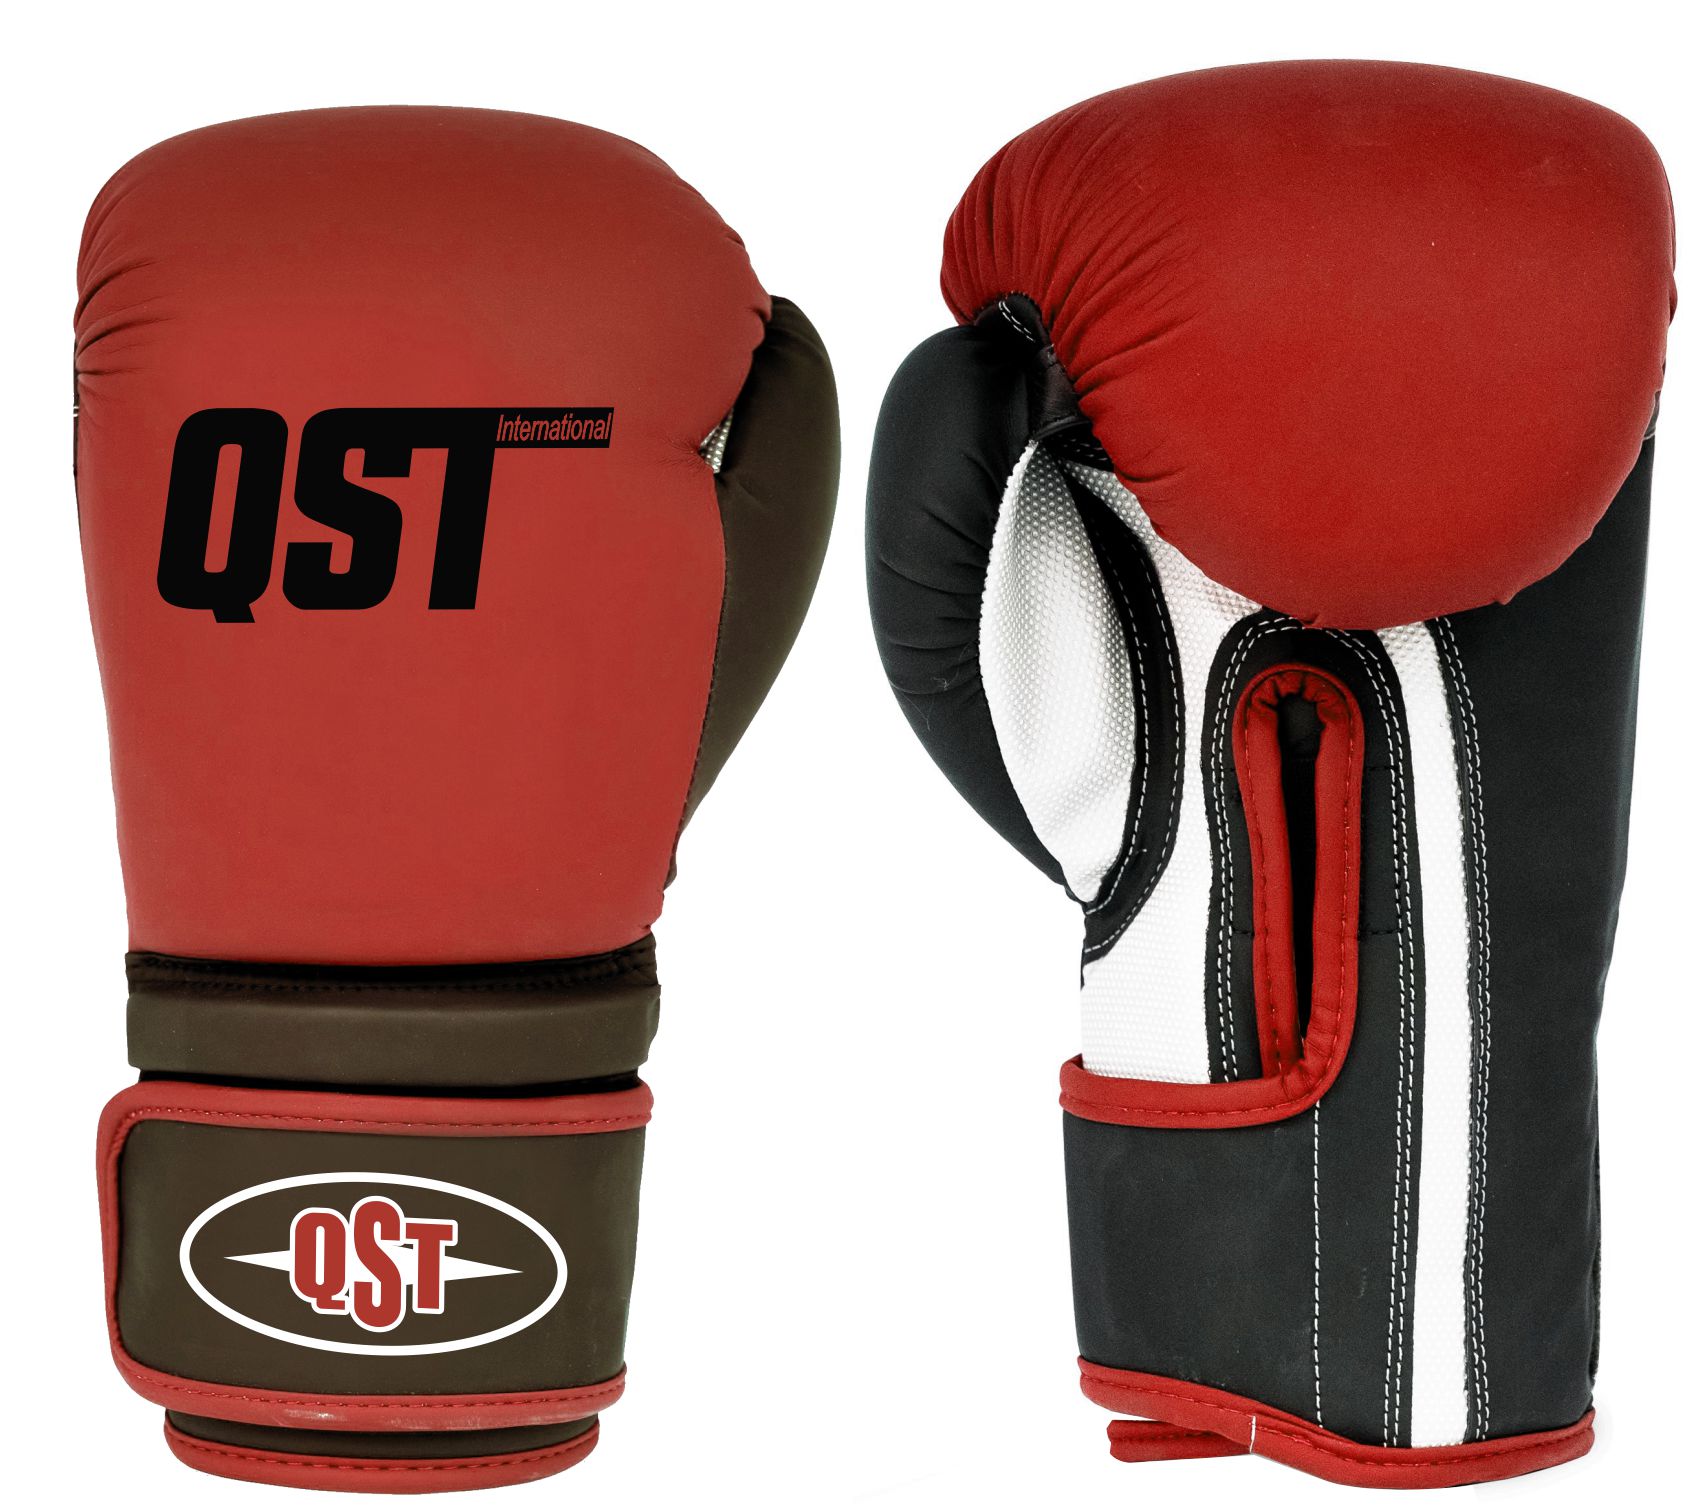 Professional Boxing Gloves - PRG-1505